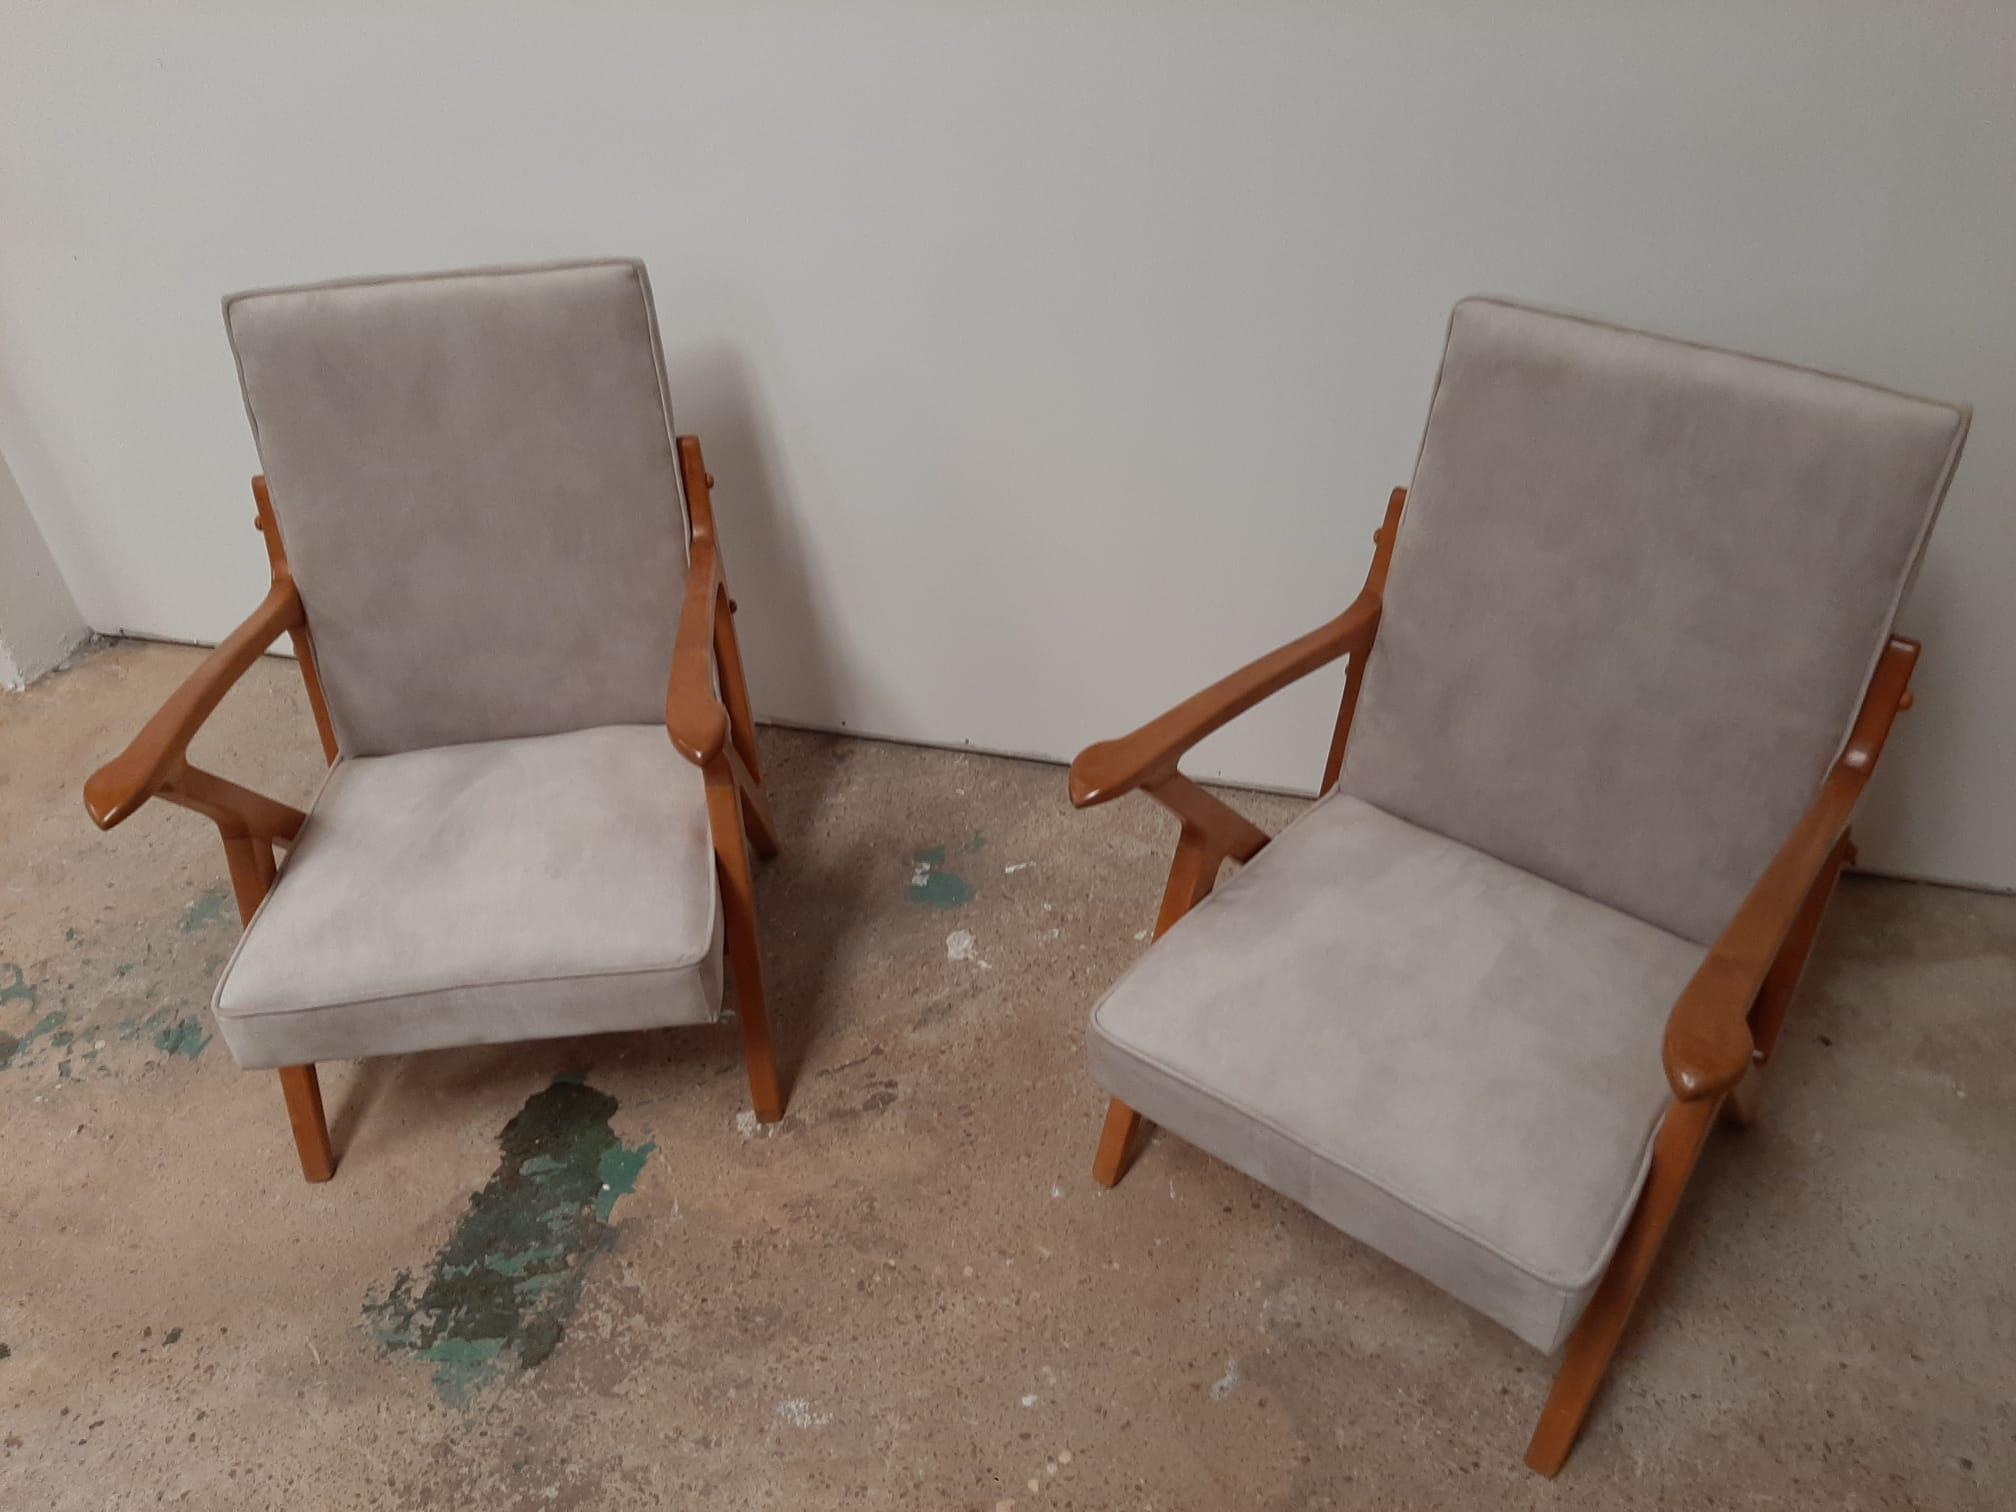 Pair of 1970s designer midcentury Scandinavian style armchairs, made of beech wood, reupholstered in a velvety light gray and stain-resistant fabric, finished with studs on the back, beautiful lines, ideal for small spaces as they do not bulge